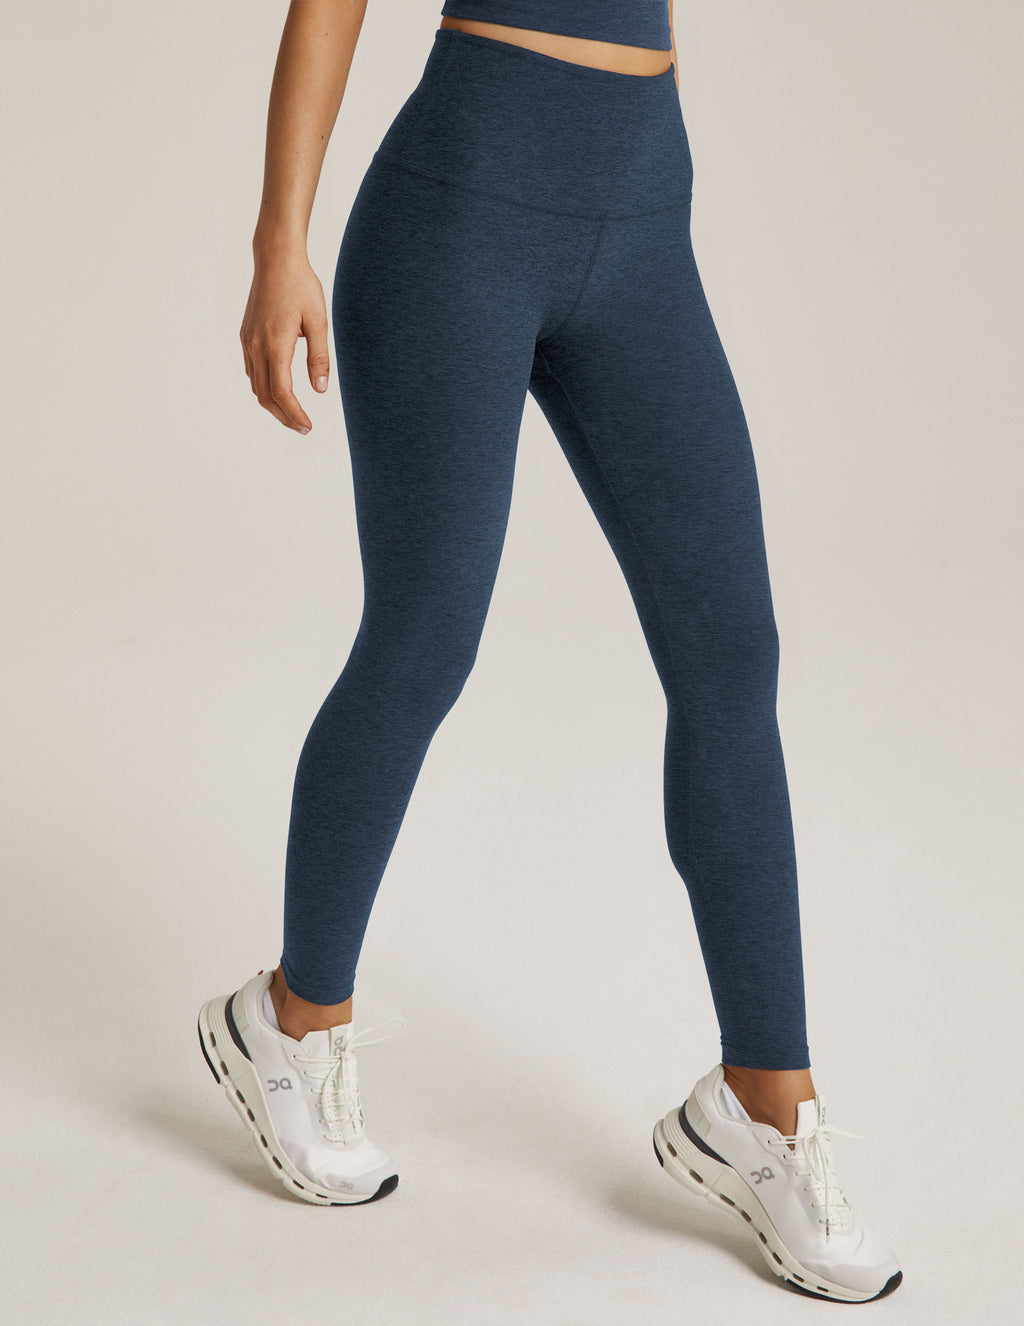 Beyond Yoga Spacedye Walk And Talk High Waisted Capri Leggings: Bay Blue  Heather Size L - $79 New With Tags - From Michelle